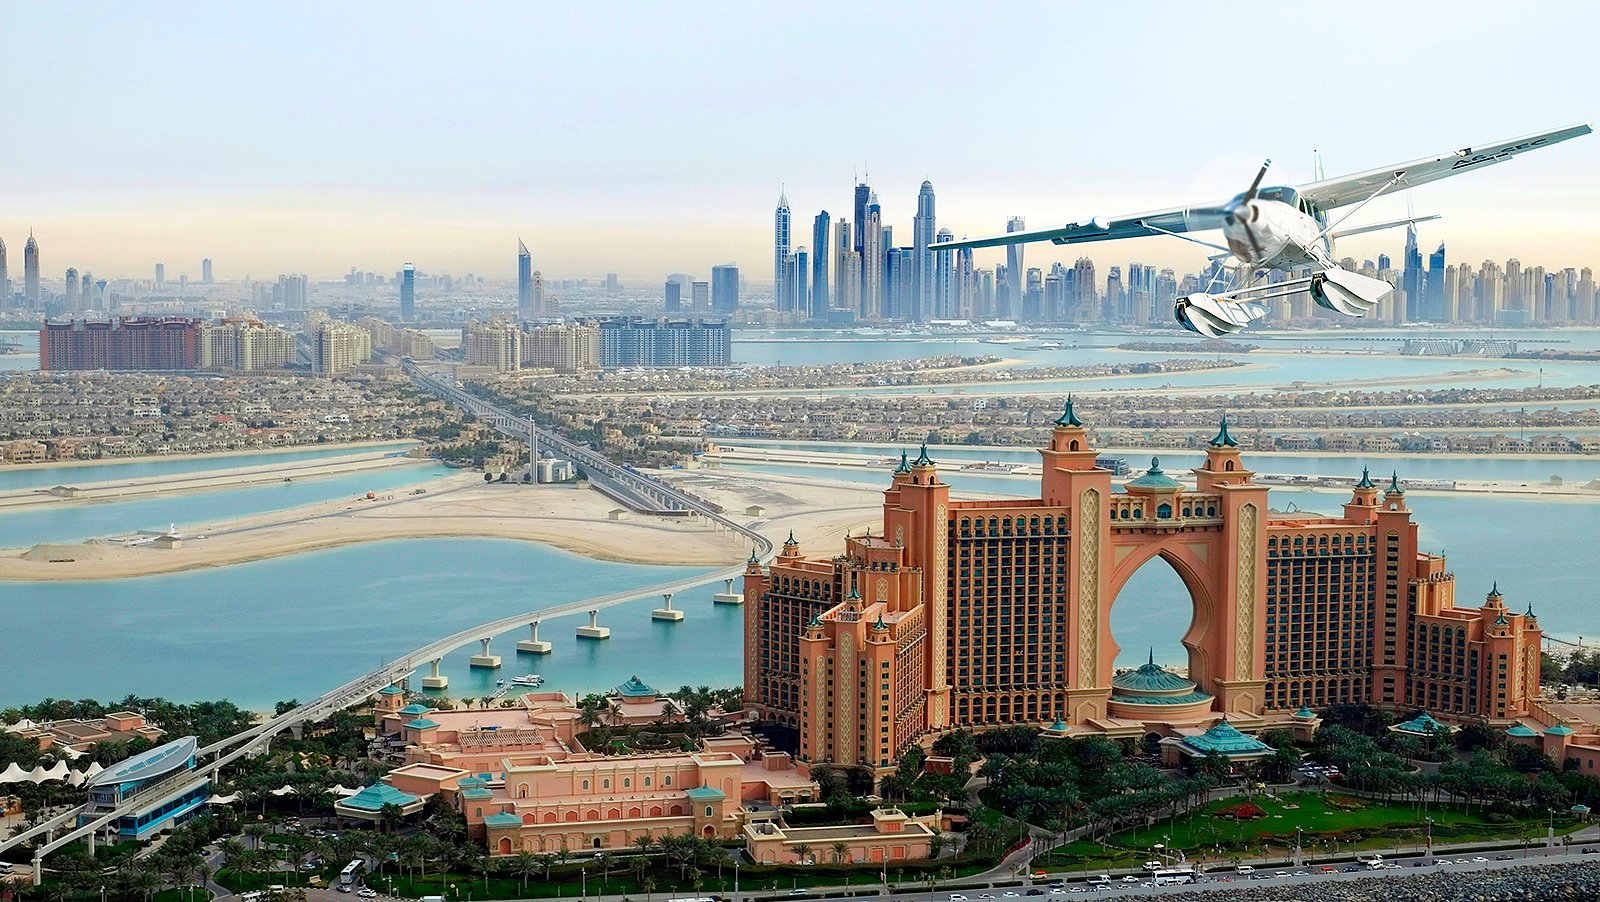 How to fly on a Seaplane in Dubai